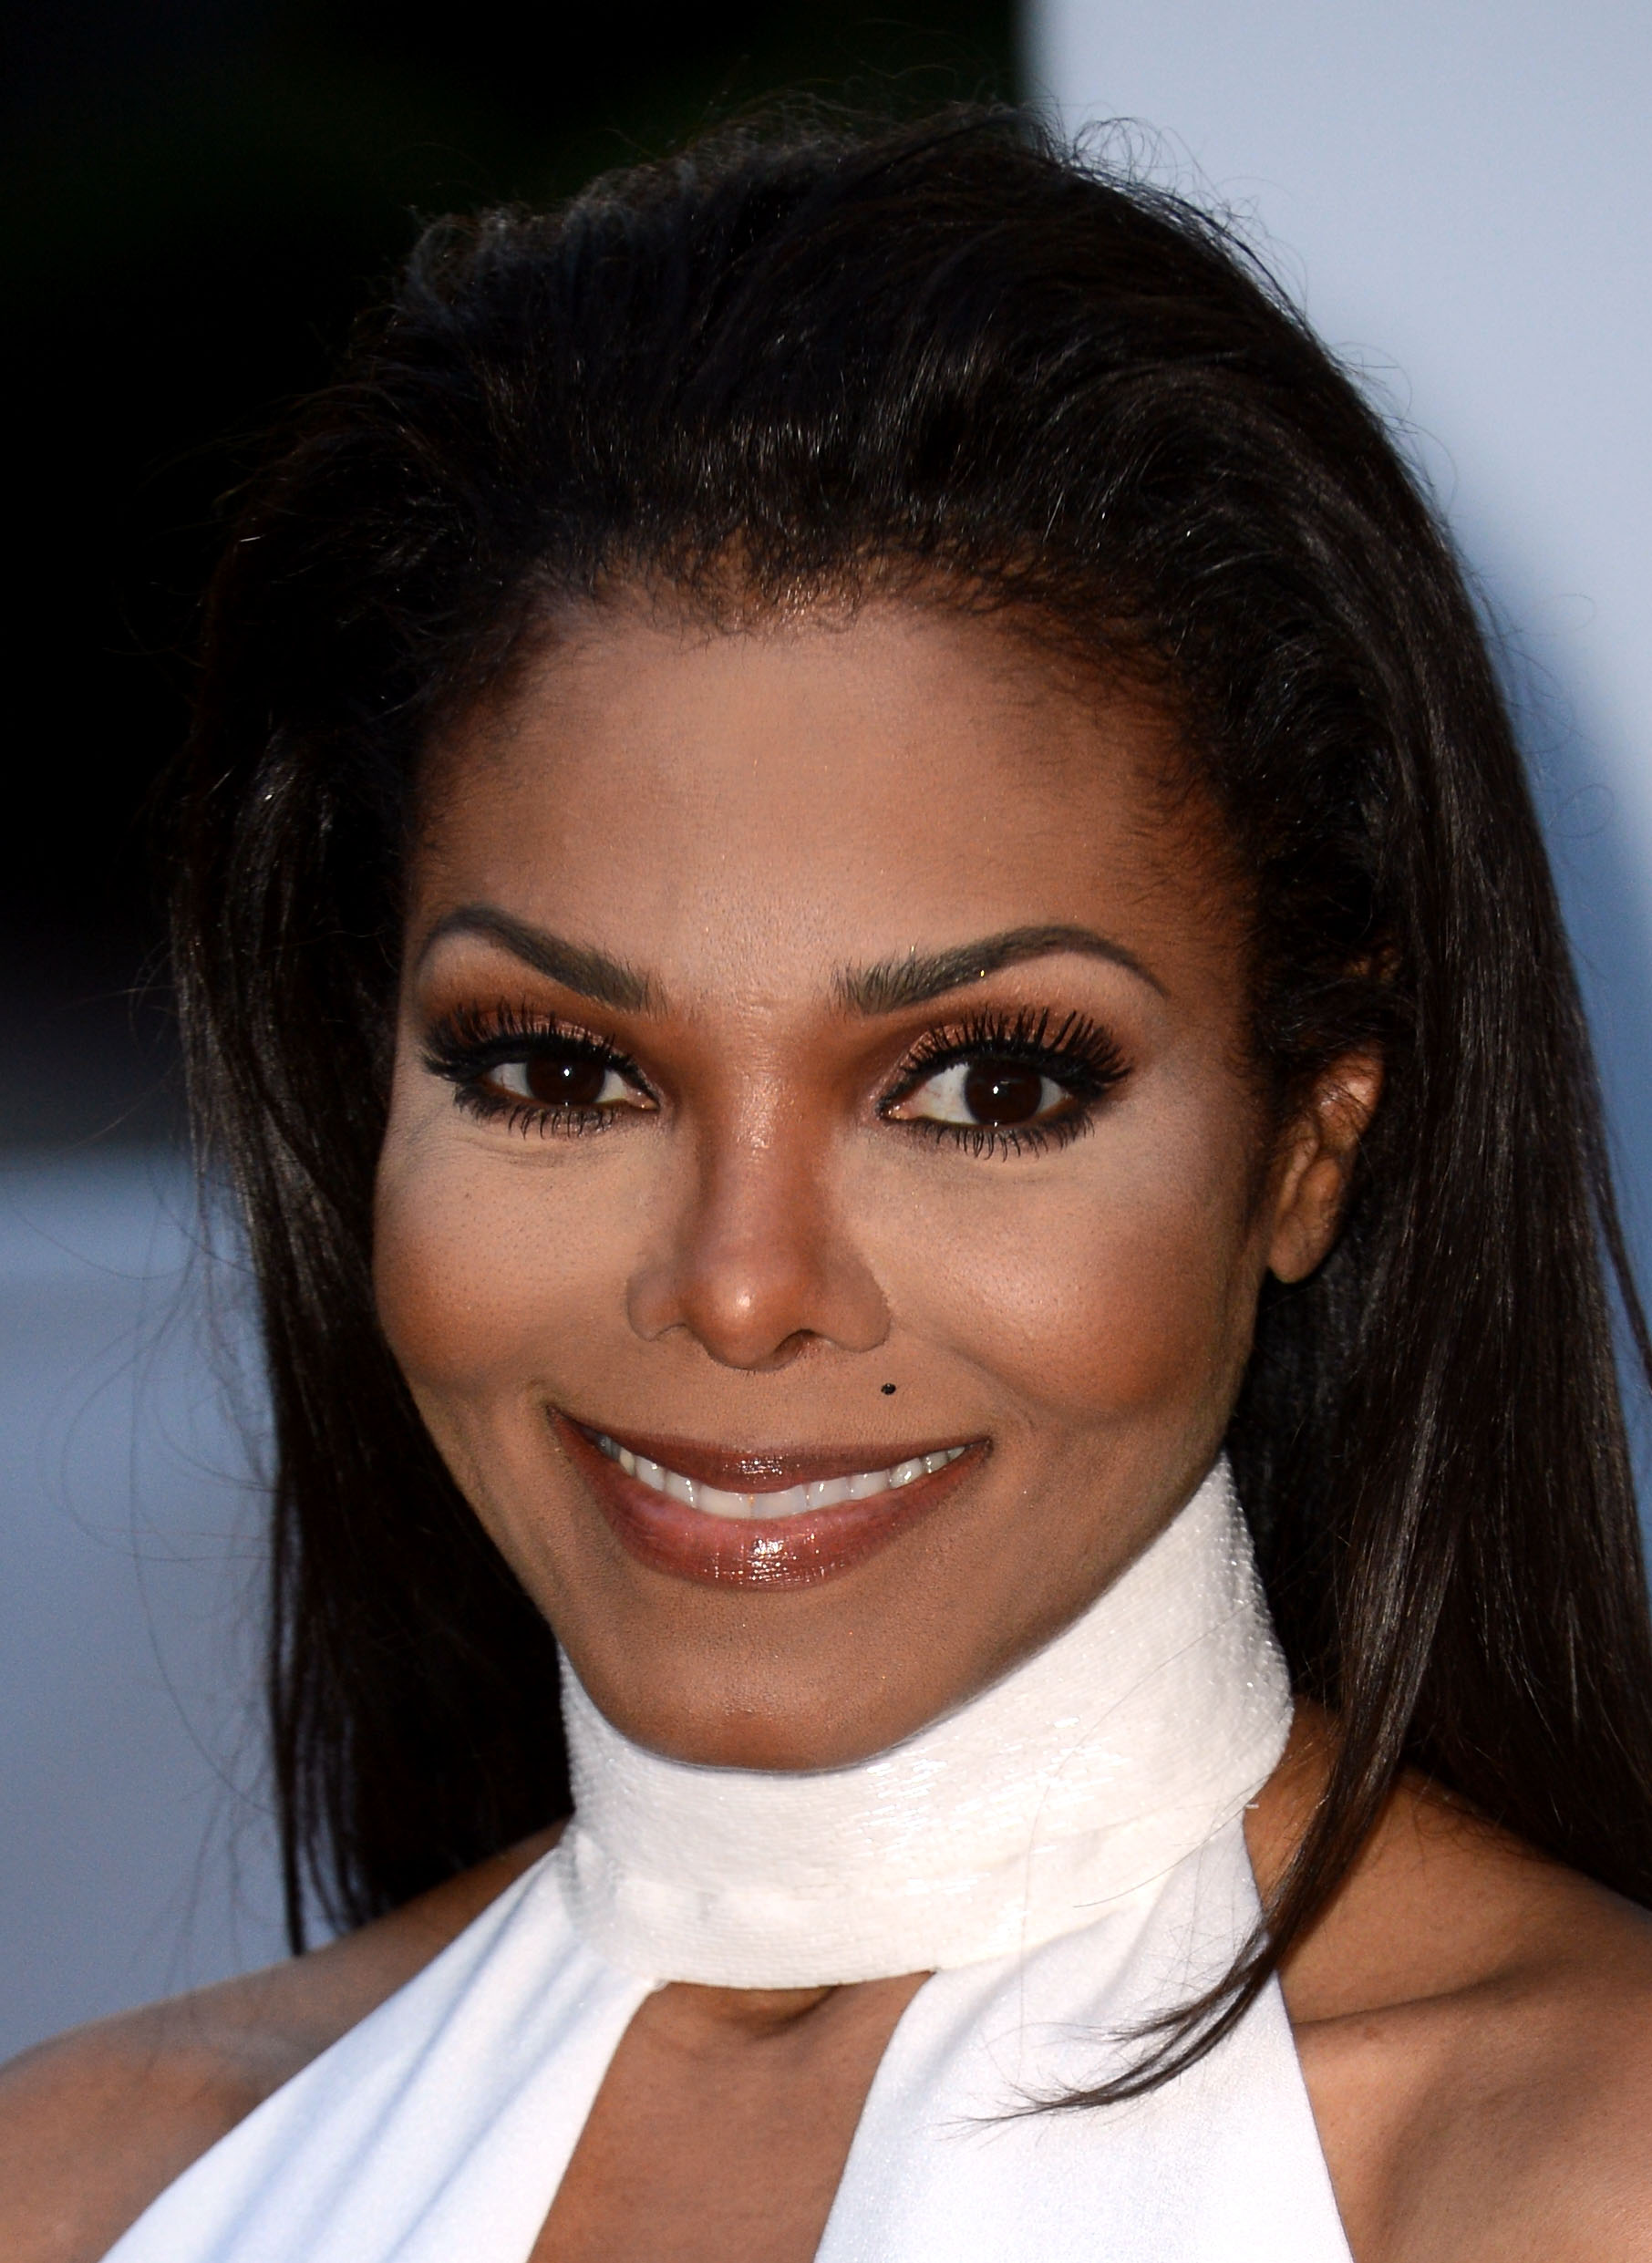 Janet Jackson arrives at the amfAR's Cinema Against AIDS during the 65th Annual Cannes Film Festival in Cap D'Antibes, France on May 24, 2012. | Source: Getty Images